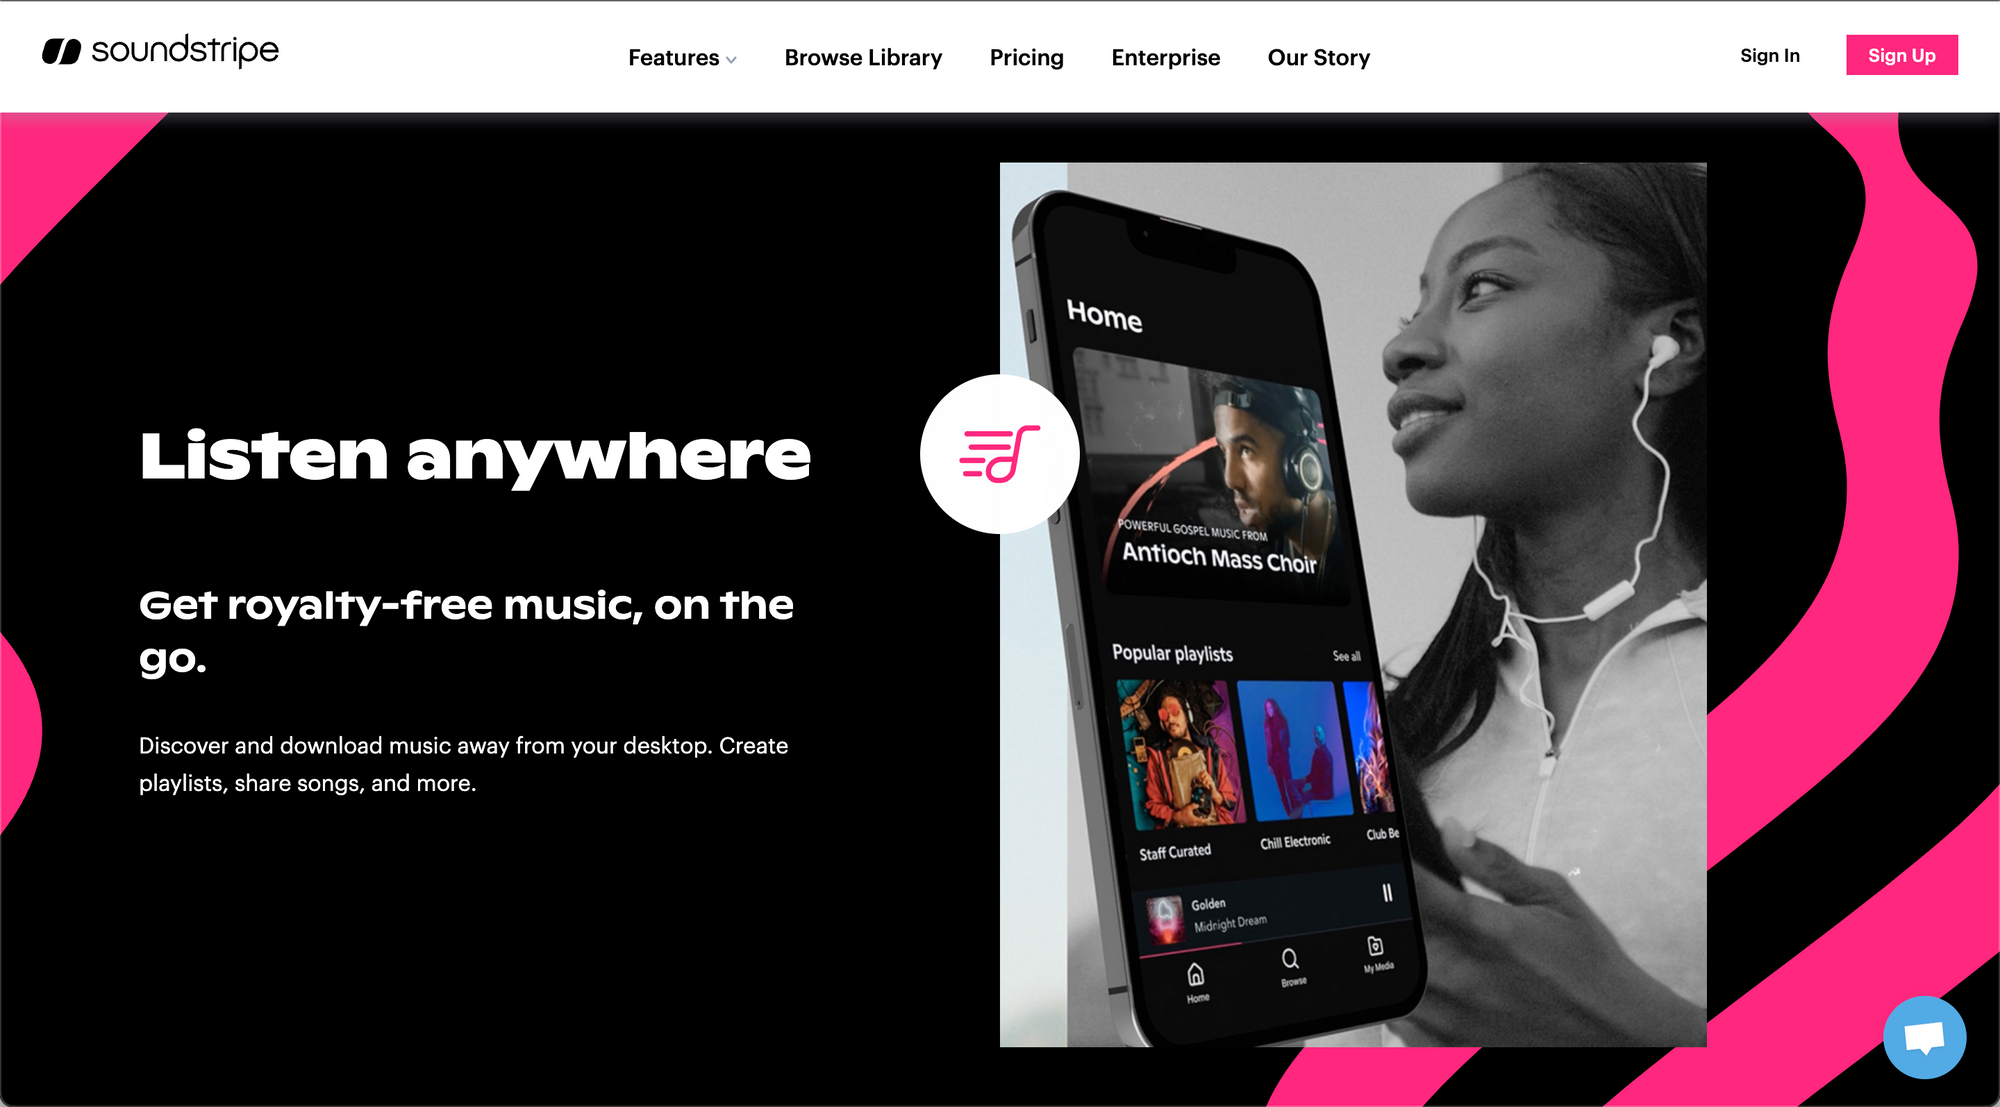 Soundstripe releases mobile-first app for creating royalty-free music playlists on the go.